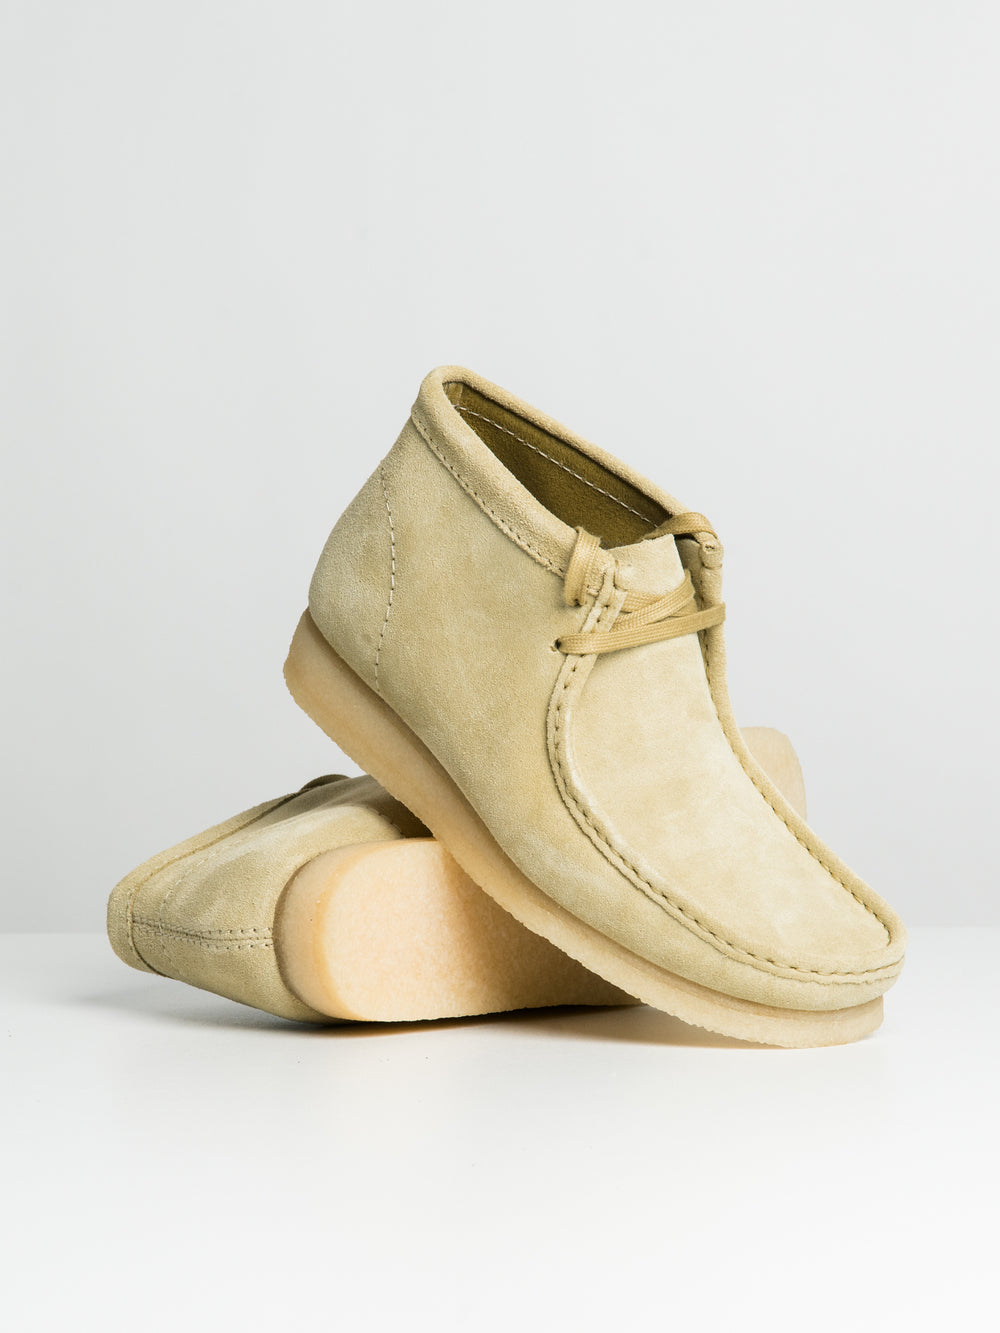 Clarks Men's Wallabee Cup Shoes - Maple Check